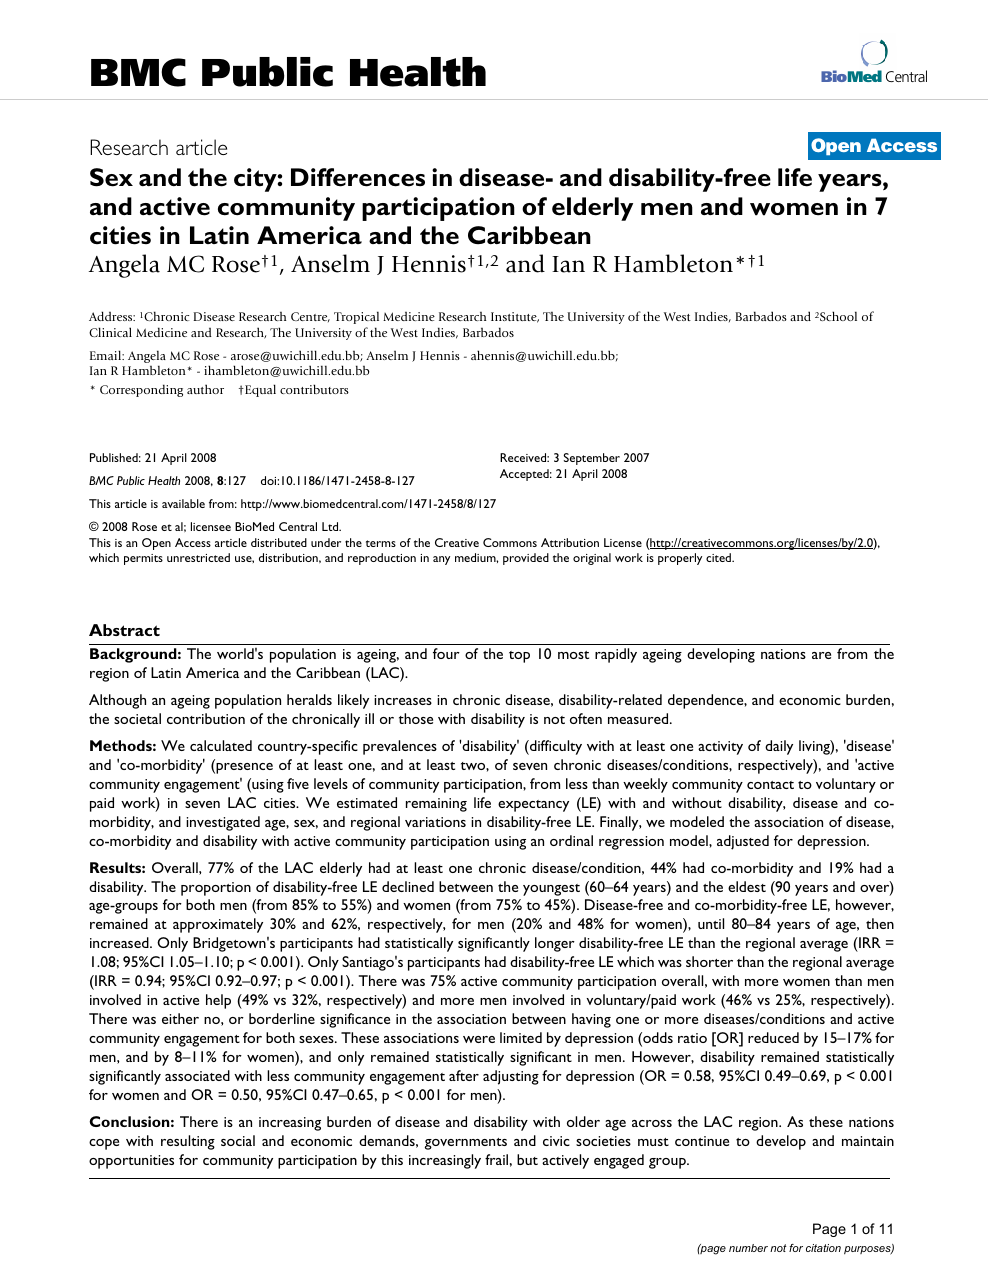 Sex And The City Differences In Disease And Disability Free Life Years And Active Community Participation Of Elderly Men And Women In 7 Cities In Latin America And The Caribbean Topic Of